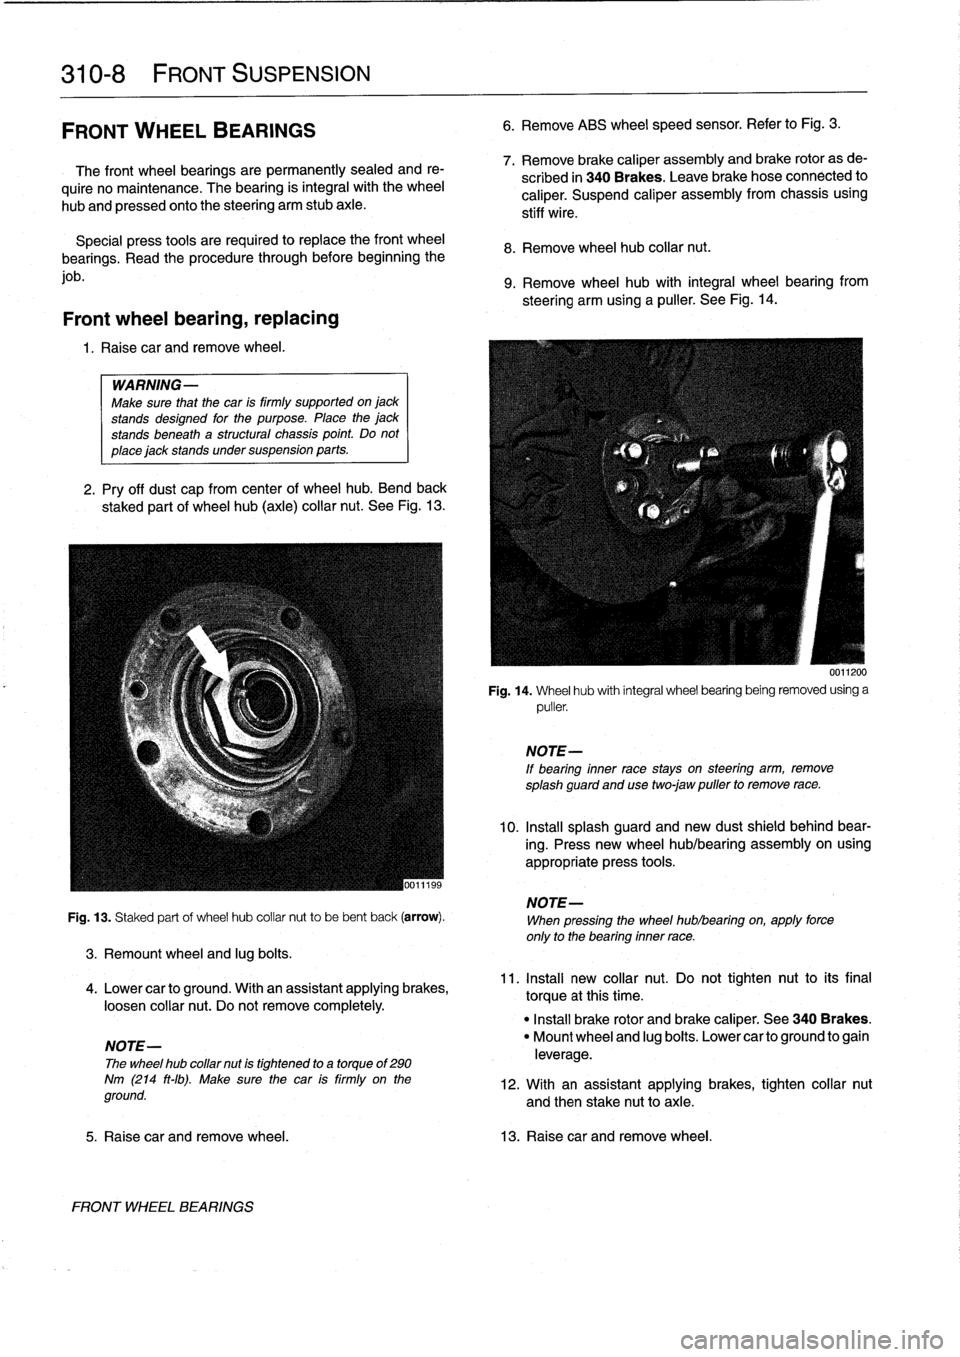 BMW 318i 1997 E36 User Guide 
310-
8

	

FRONT
SUSPENSION

FRONT
WHEEL
BEARINGS

The
front
wheel
bearings
are
permanently
sealed
and
re-

quire
no
maintenance
.
The
bearing
is
integral
with
the
wheel

hub
and
pressed
onto
the
ste